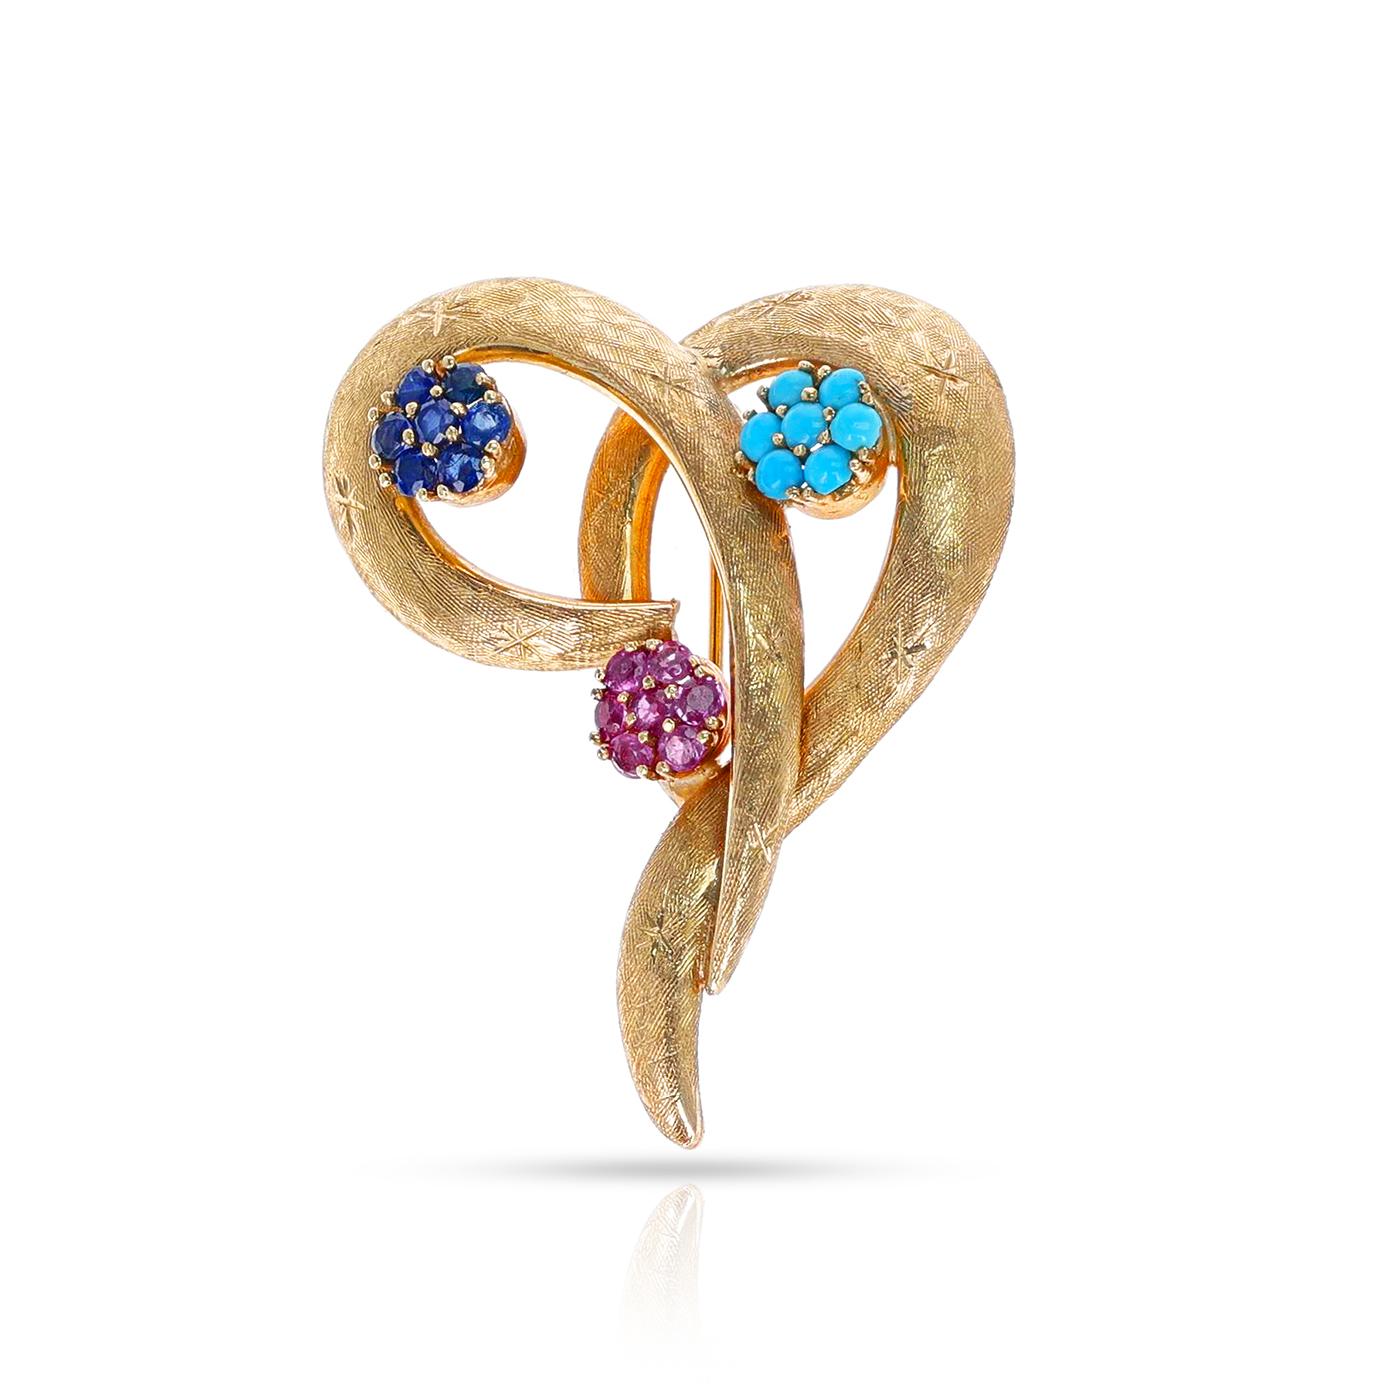 A Ruby, Sapphire and Turquoise Heart Brooch made in 14k Yellow Gold. The total weight is 11.80 grams. The dimensions are 1.75